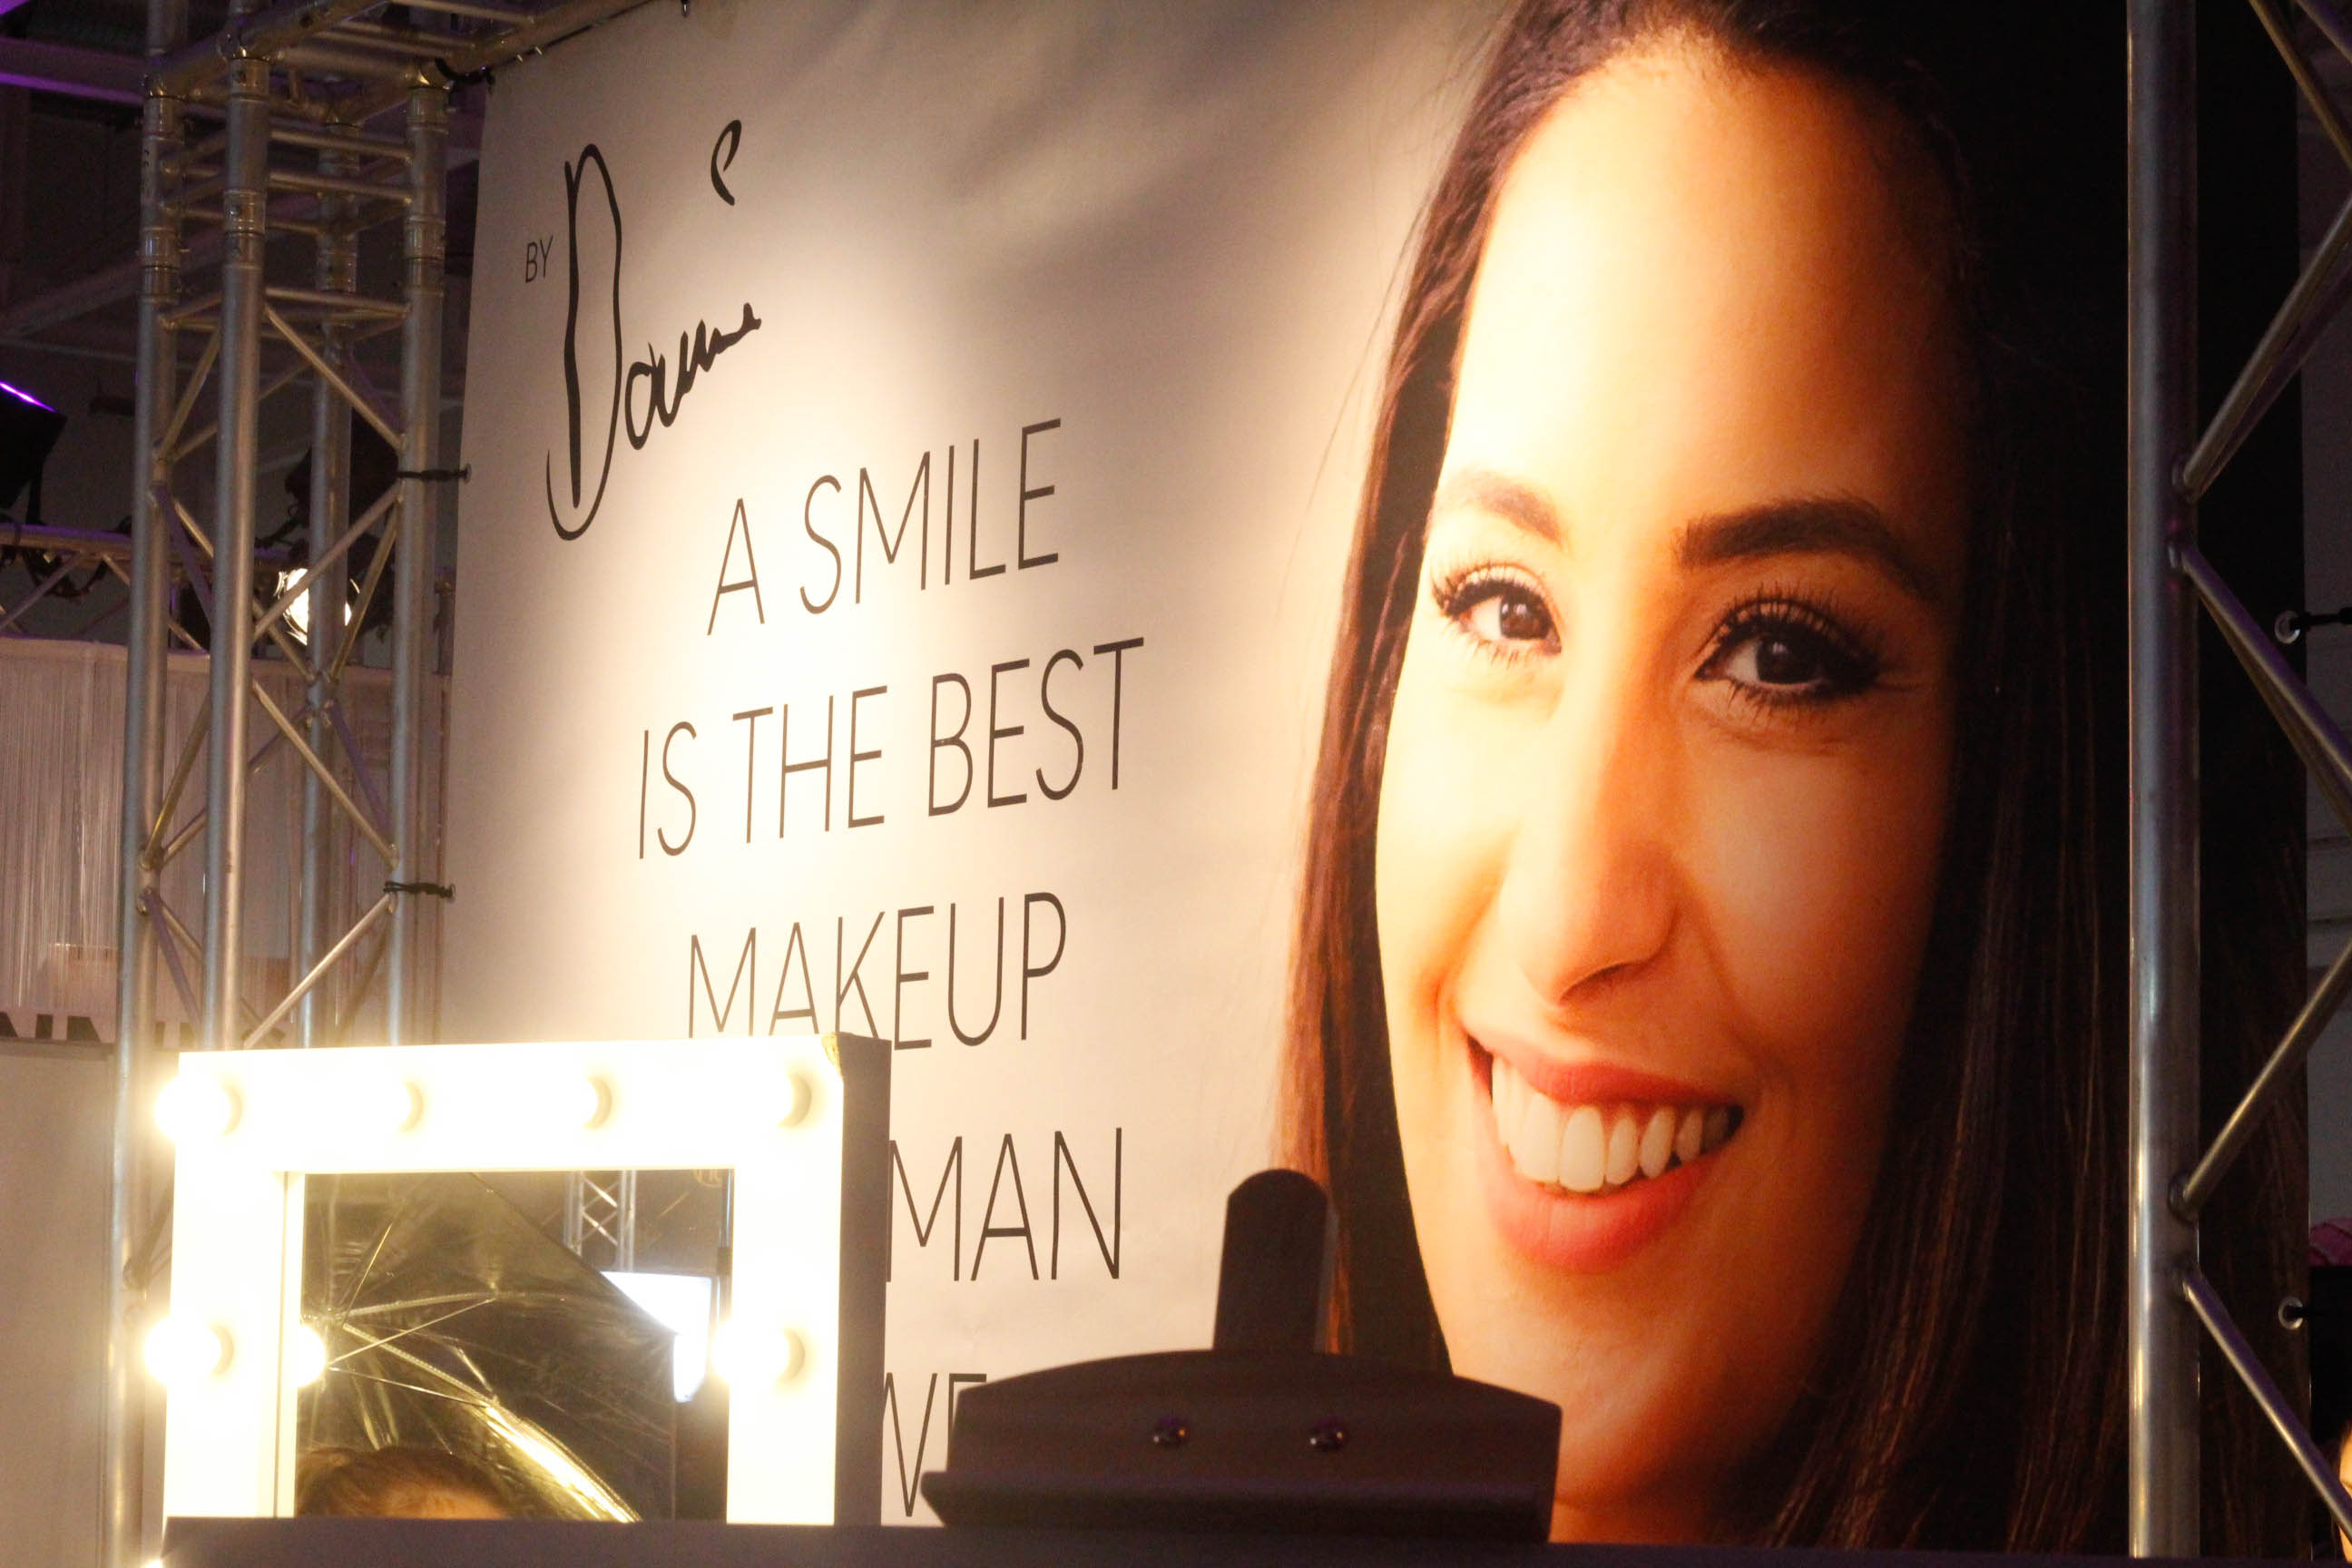 Lancome Messestand Glow Convention Hannover - Dounia Slimani Stand